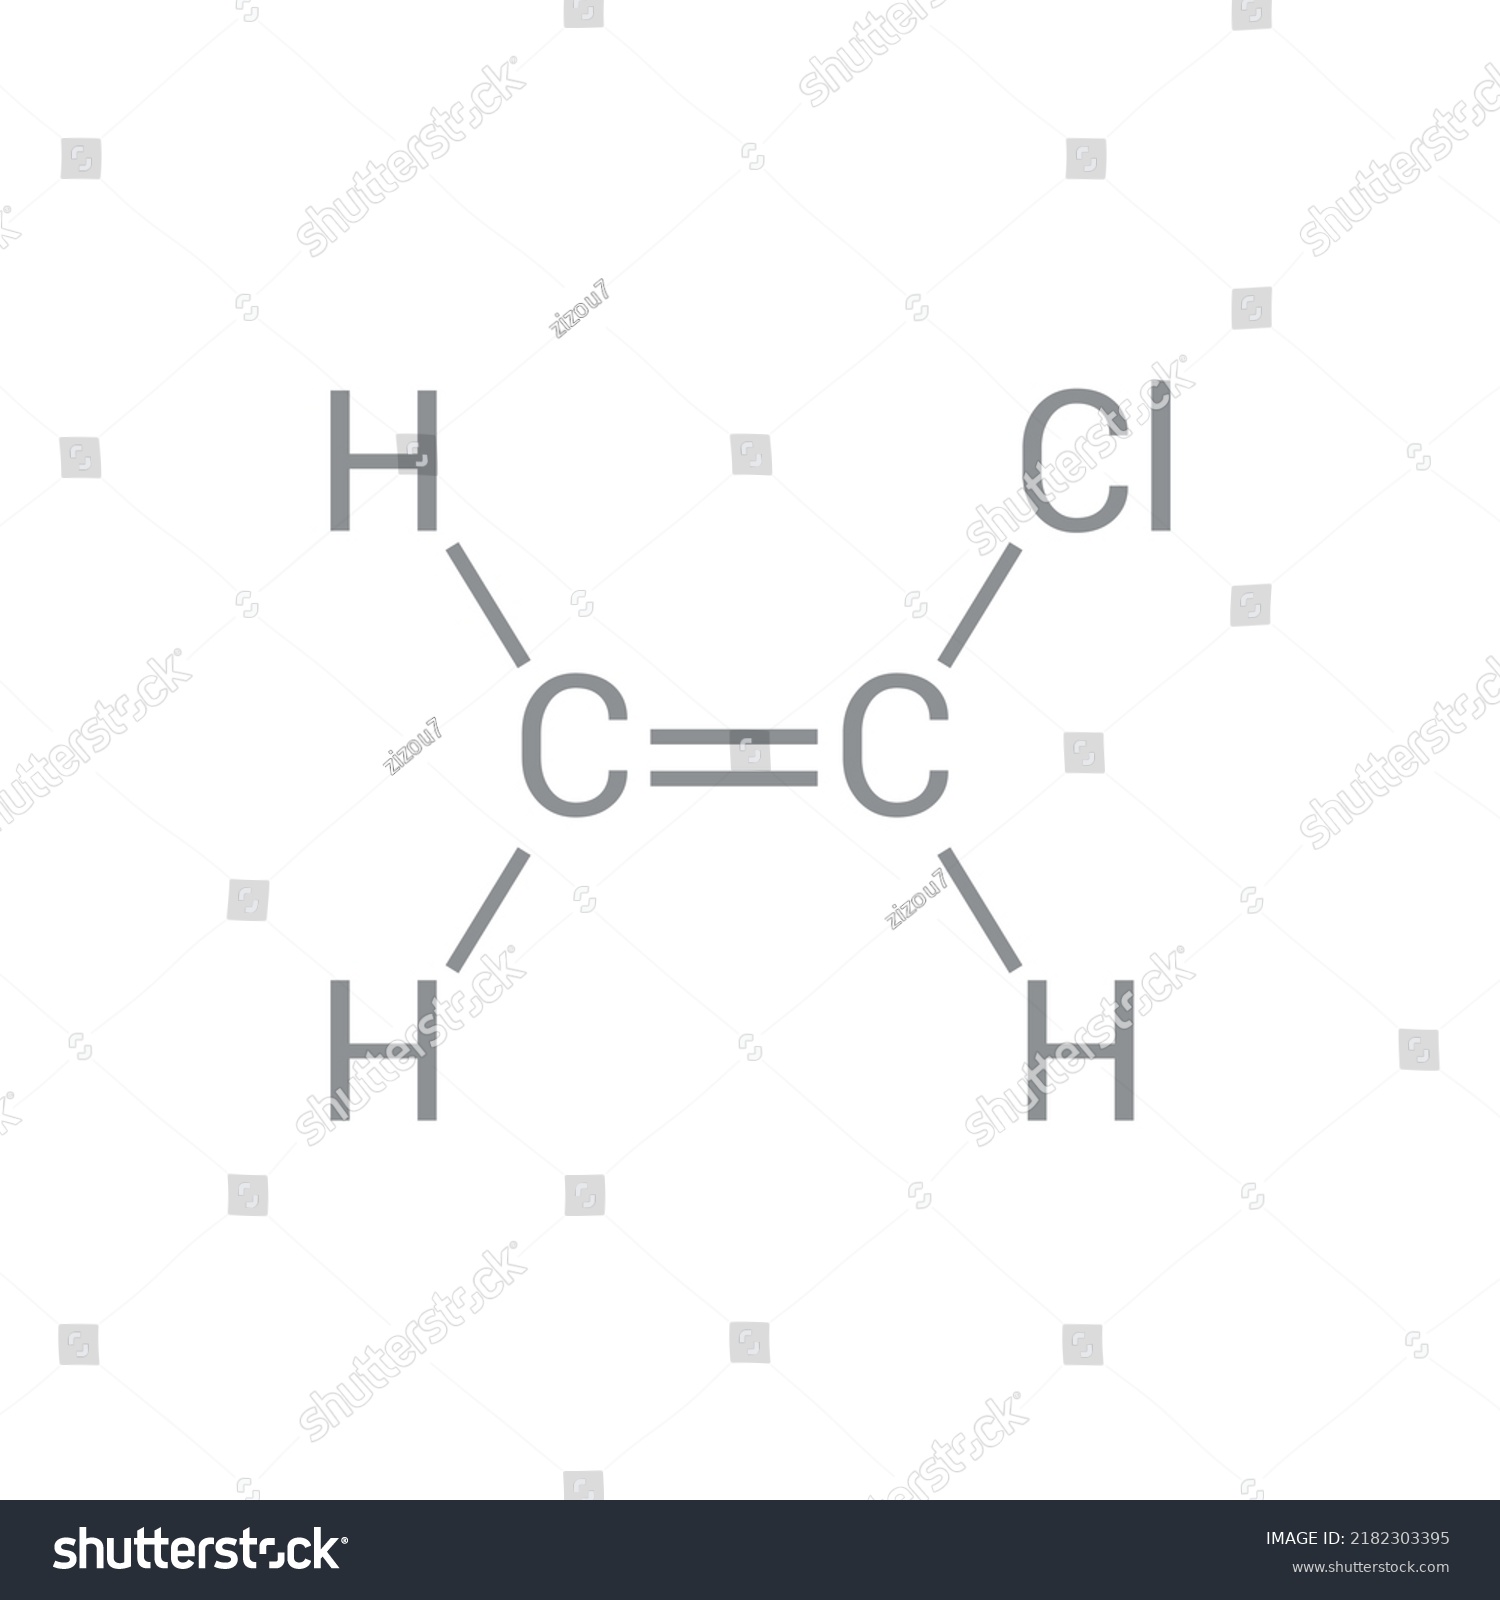 Chemical Structure Vinyl Chloride C2h3cl Stock Vector (Royalty Free ...